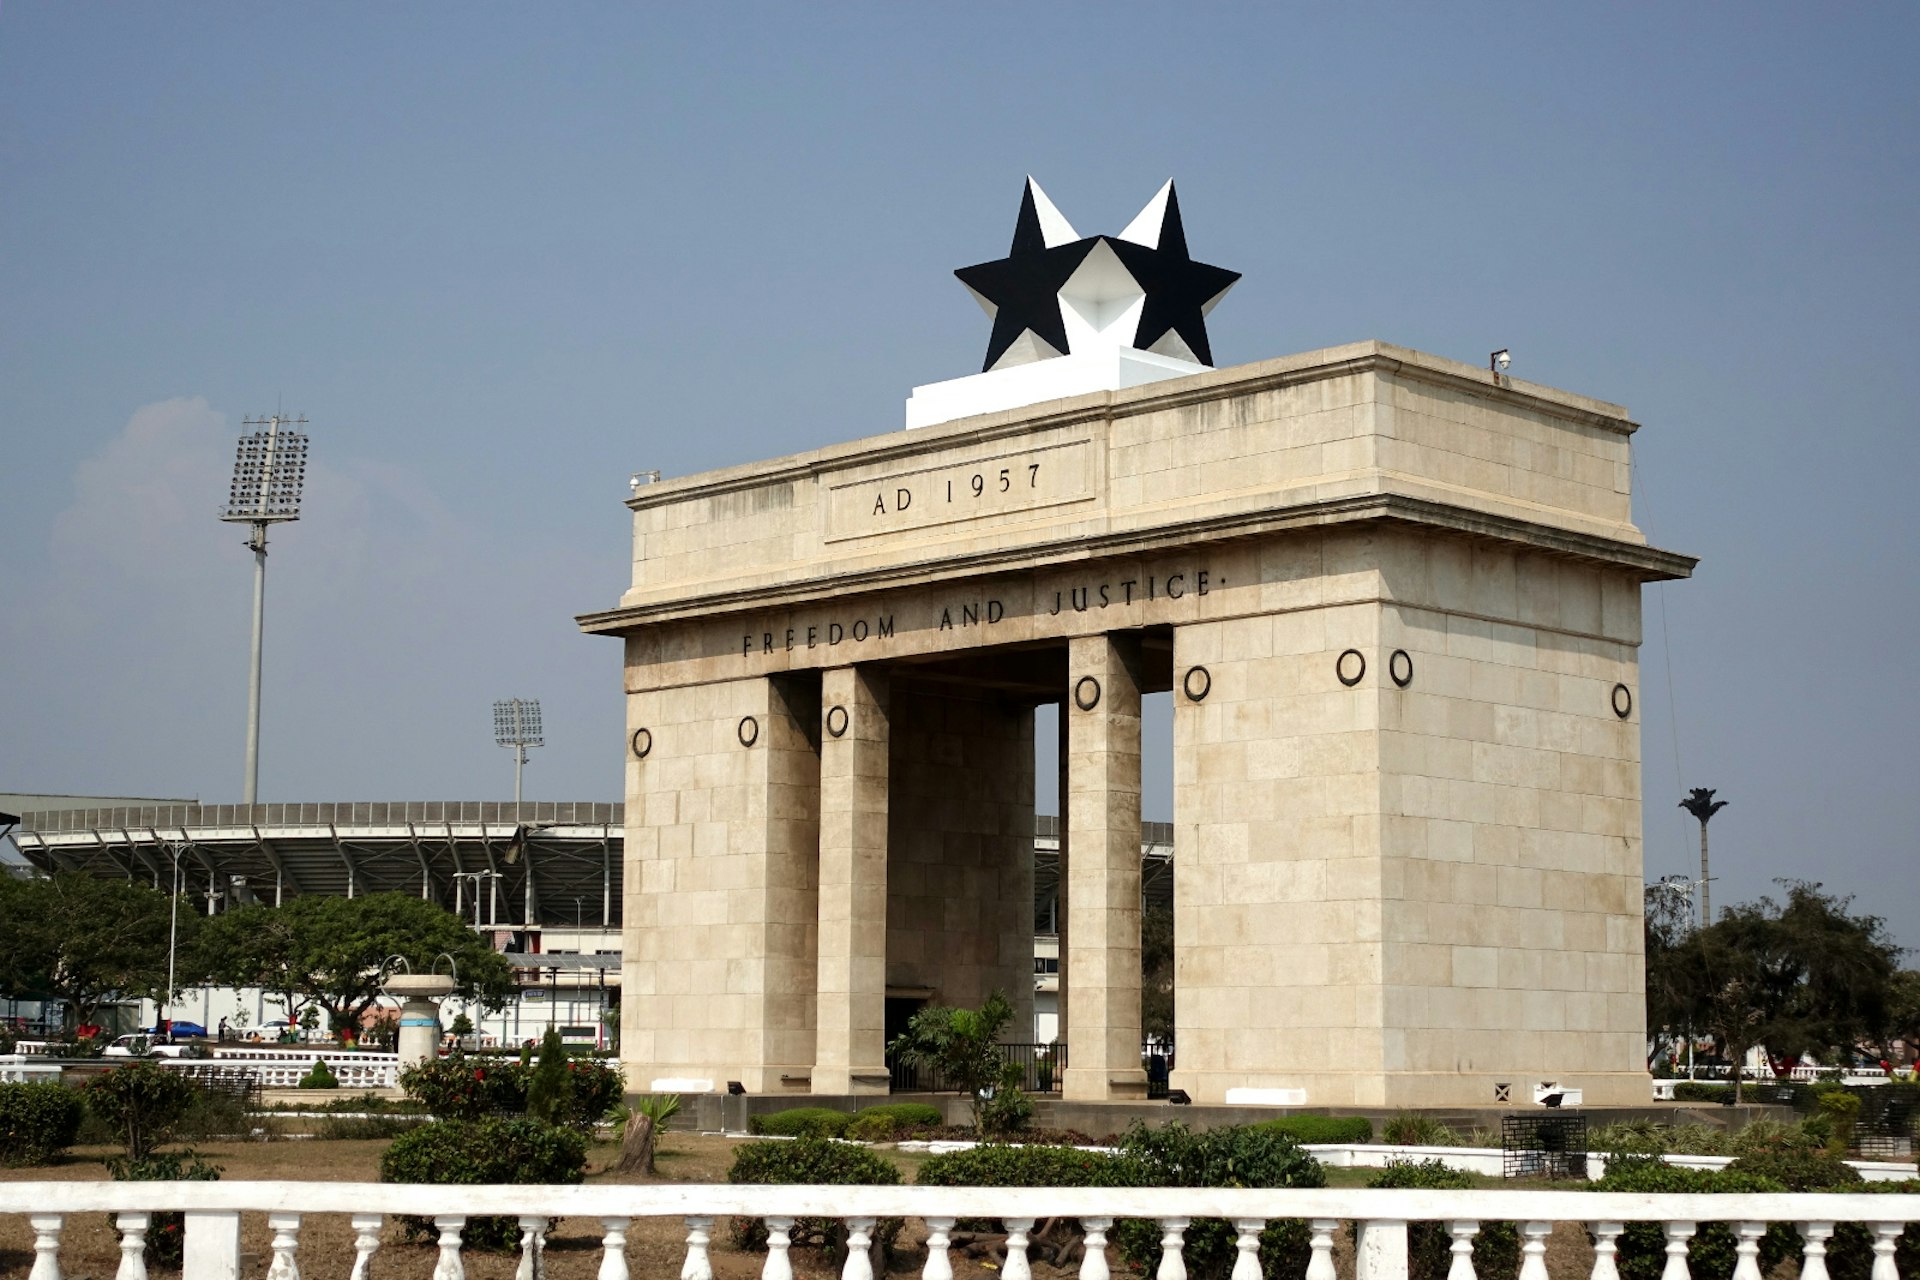 A large, rectangular stone gate, topped by large black stars, stands tall over Independence Square in Accra. The football stadium looms in the distance © Elio Stamm / Lonely Planet